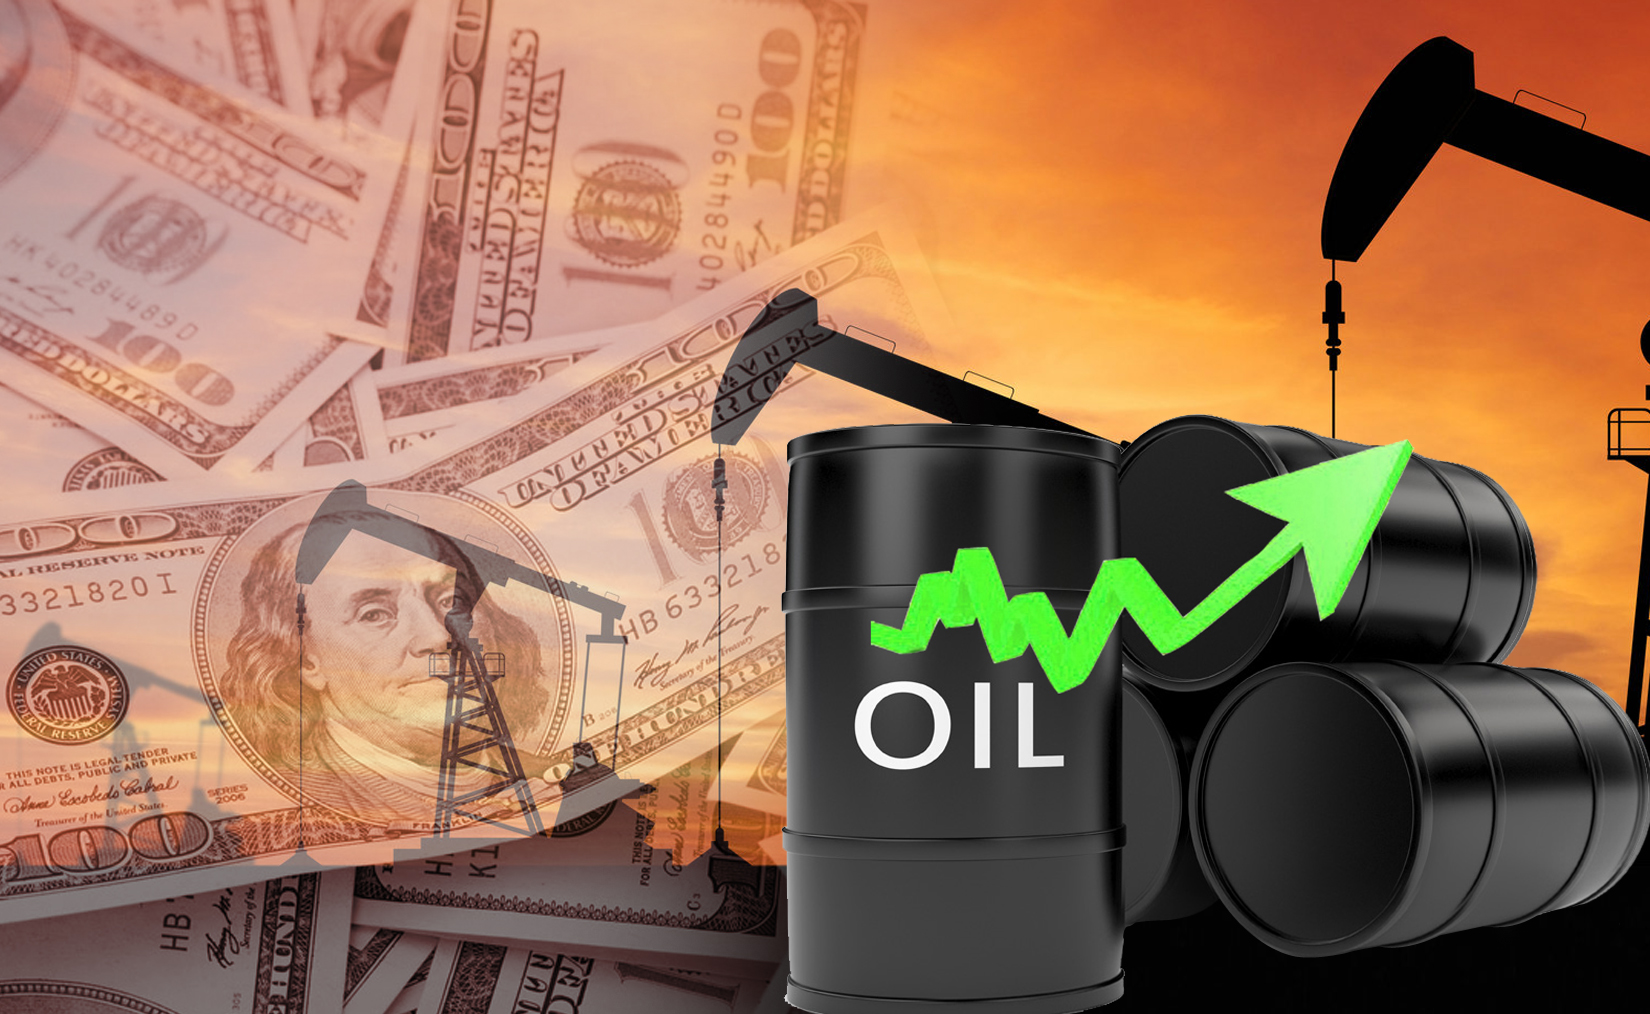 Kuwait oil price up 44 cents to USD 79.32 pb                                                                                                                                                                                                              